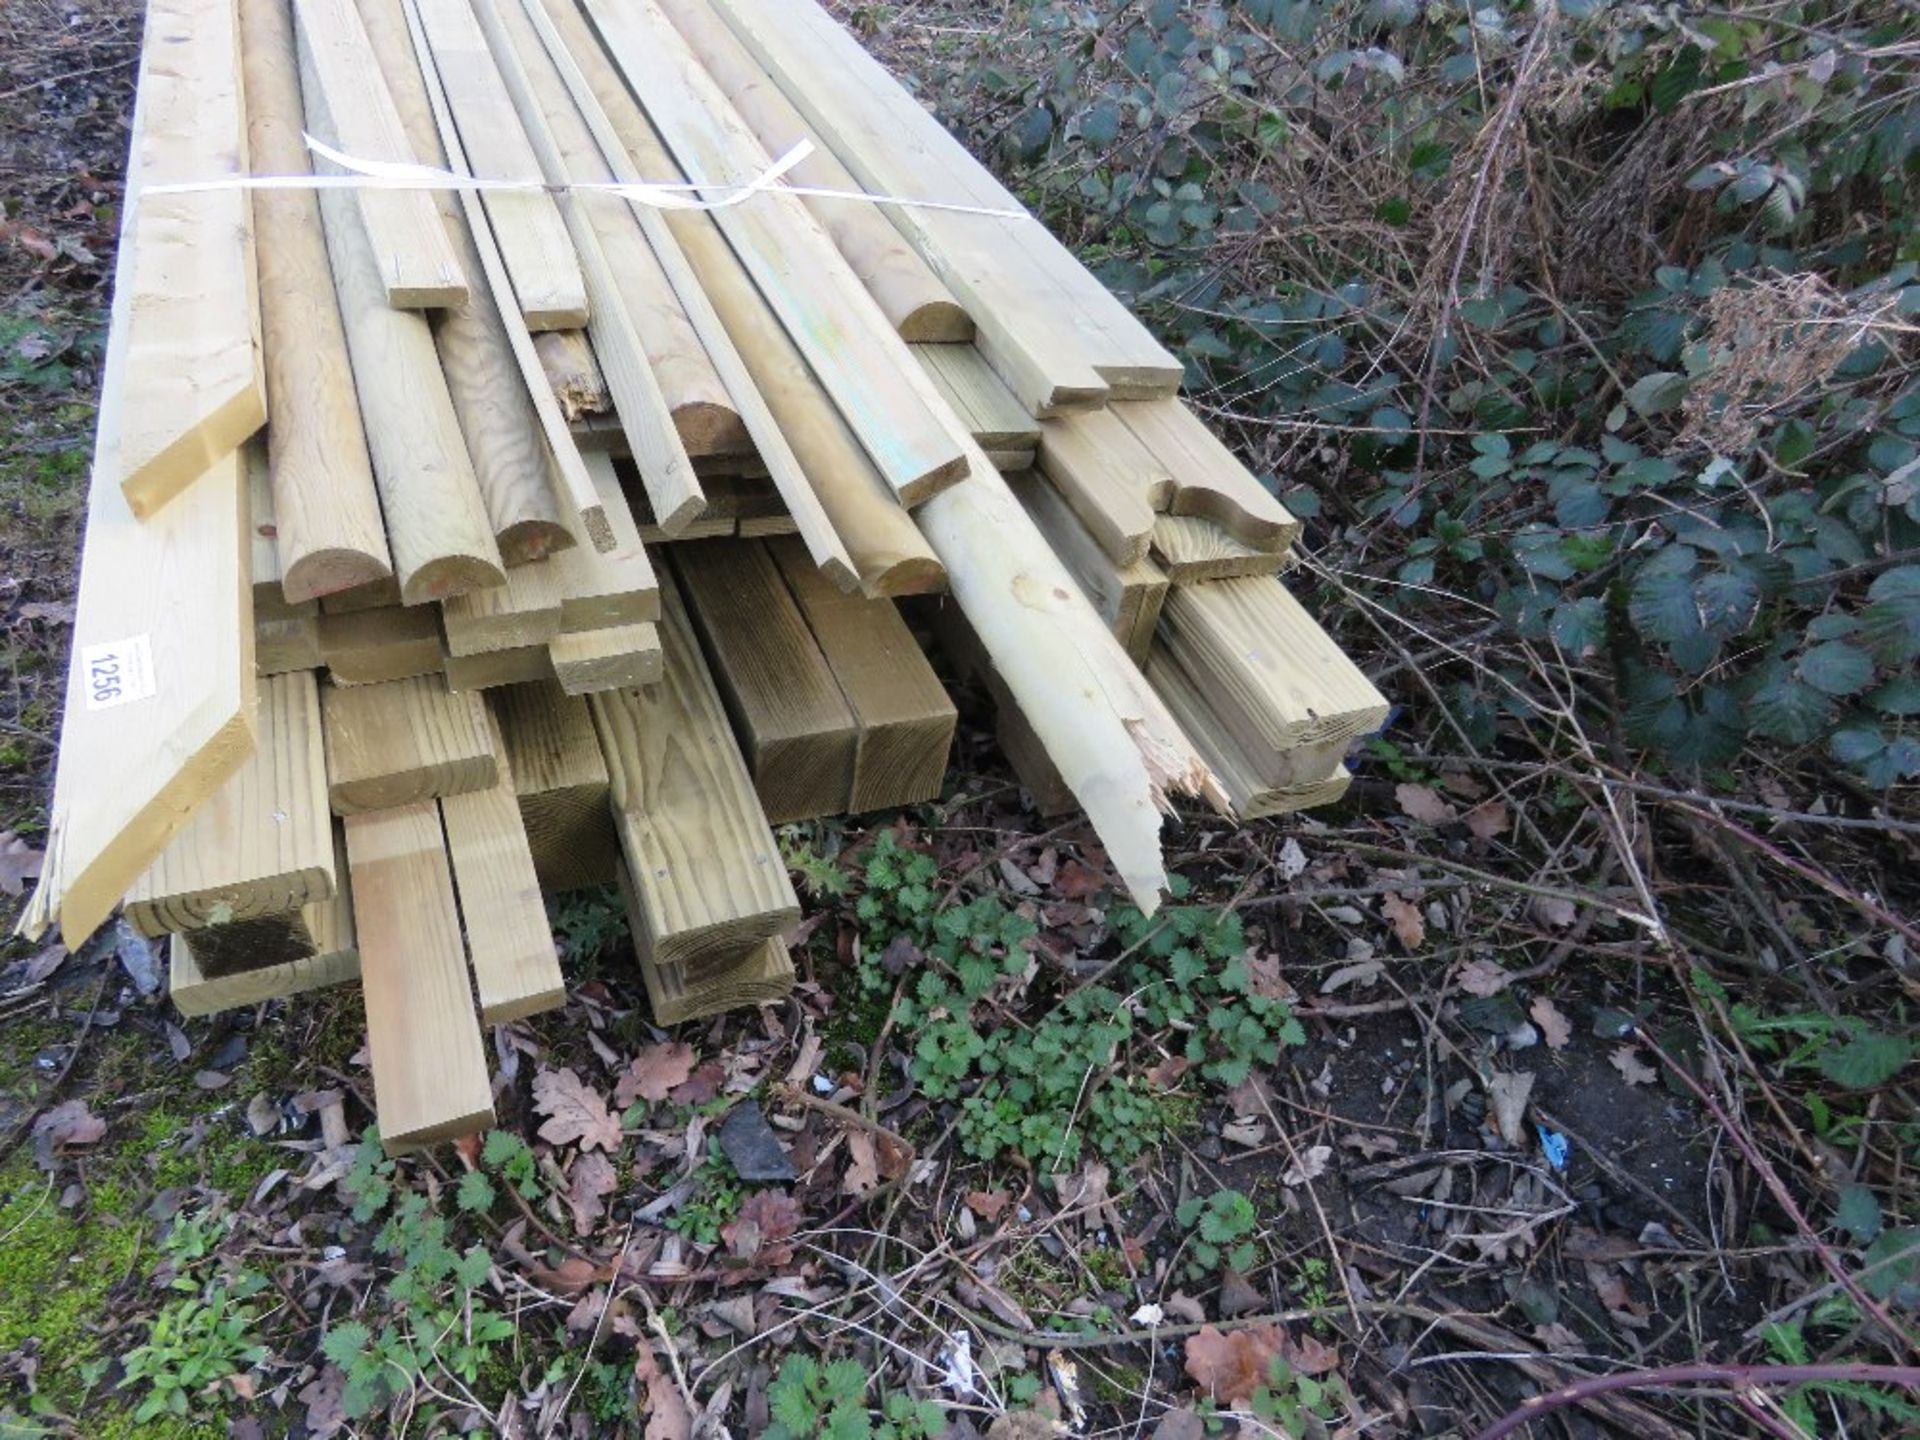 LARGE QUANTITY OF ASSORTED FENCING / CONSTRUCTION TIMBERS. - Image 2 of 2